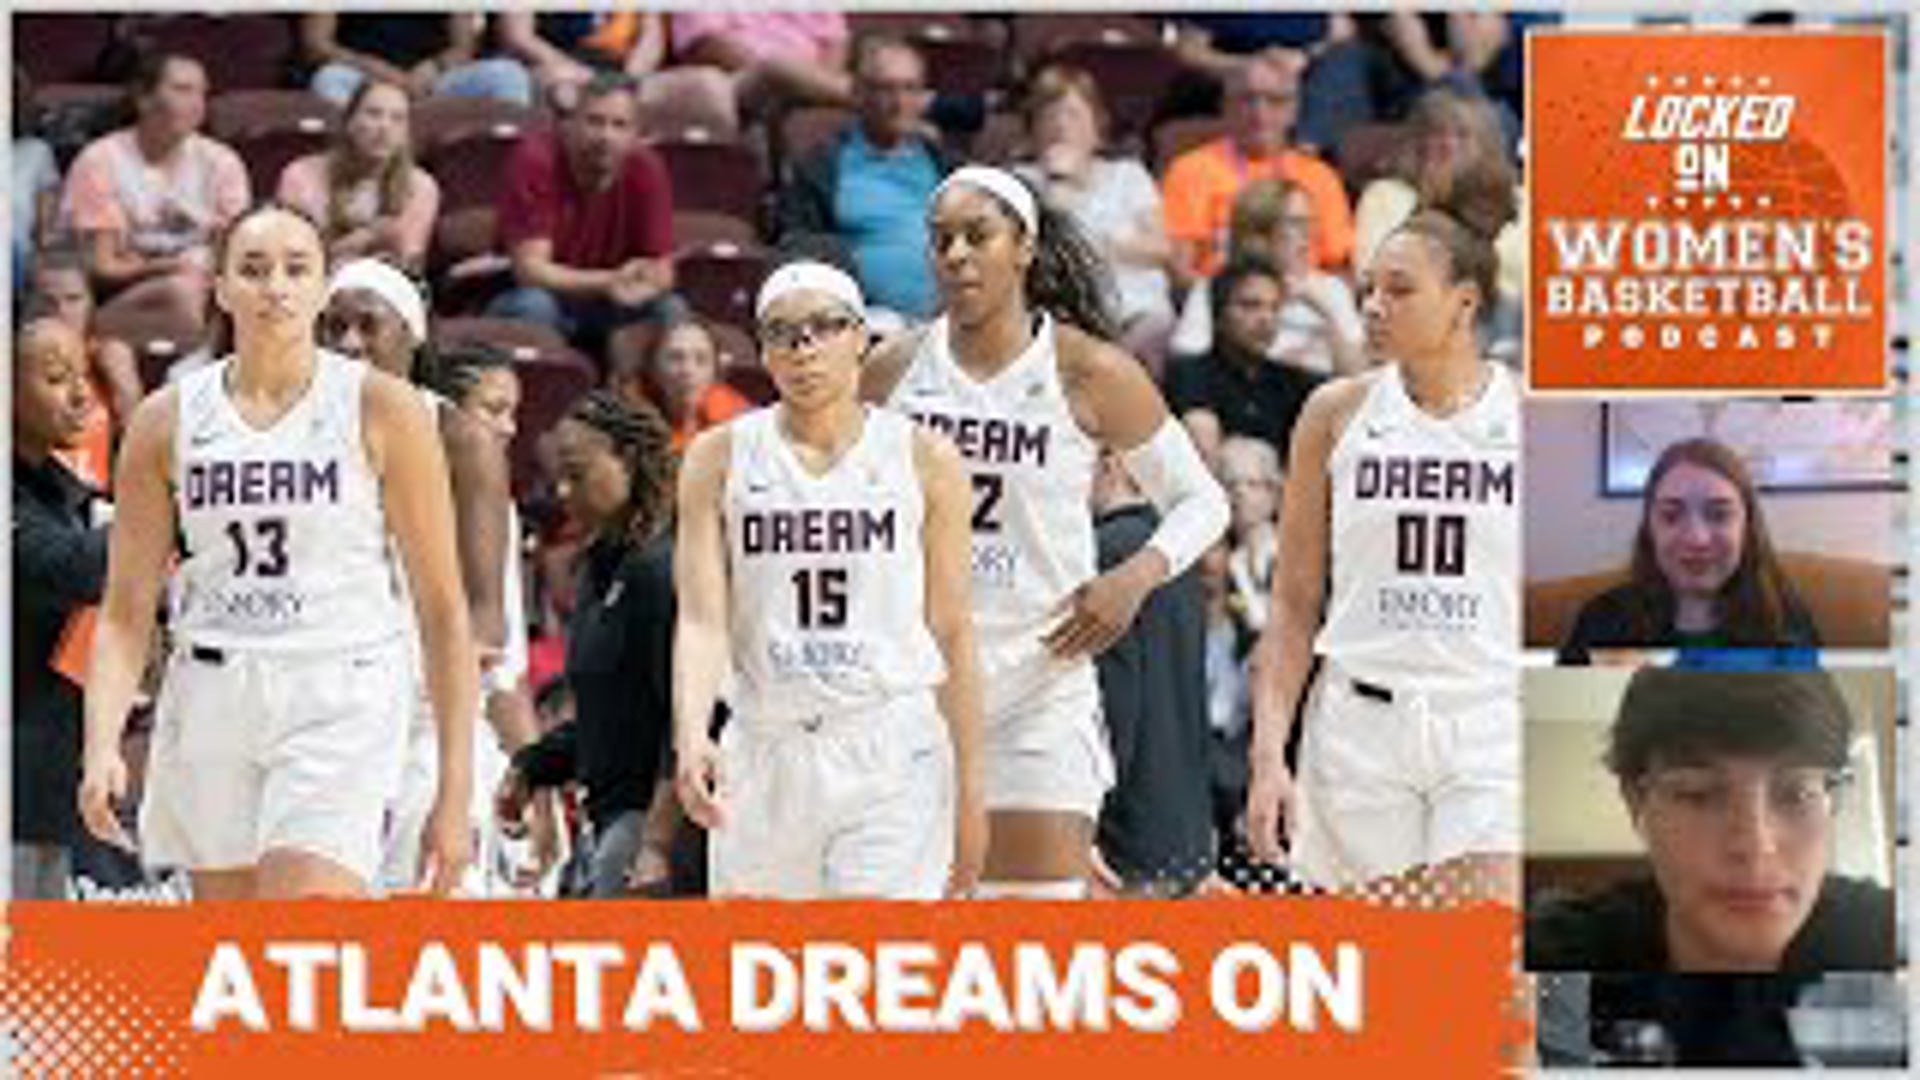 The Next’s Atlanta Dream beat writer Hunter Cruse joins host Natalie Heavren to discuss the Dream’s win over the Los Angeles Sparks on May 15.